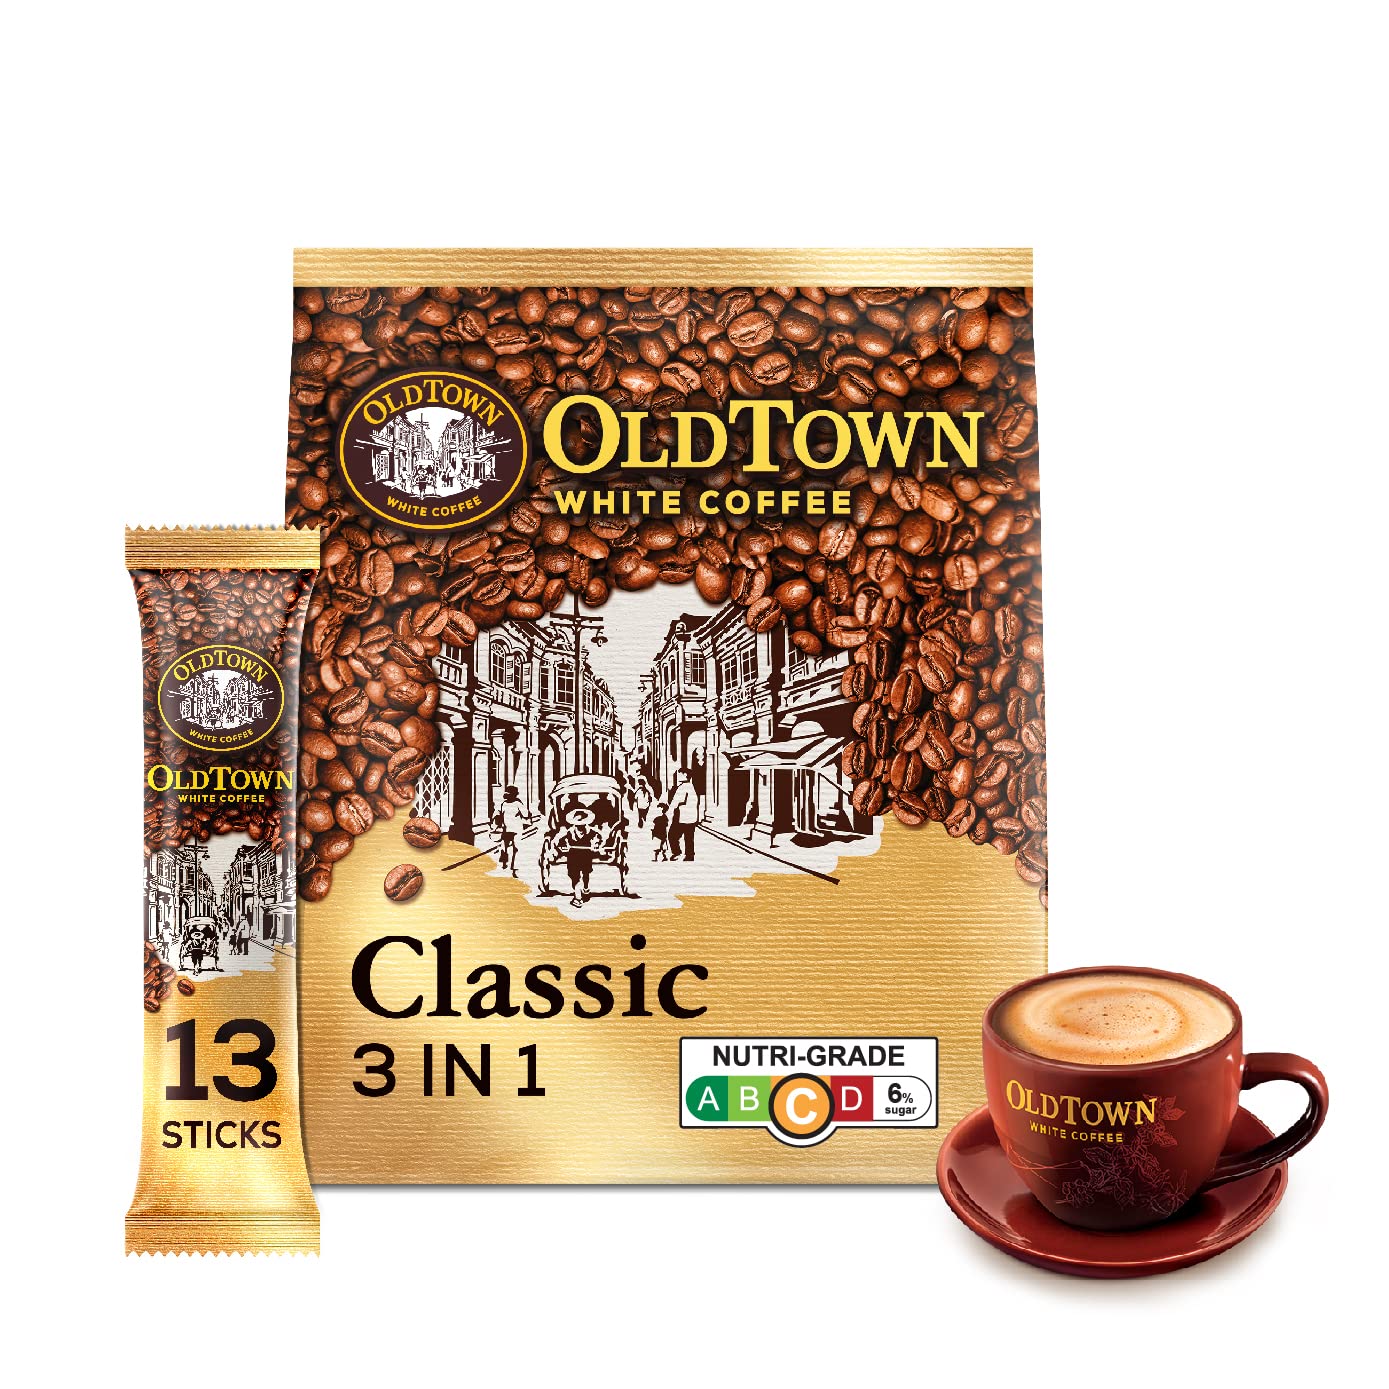 OldTown 3 in 1 White Coffee Classic